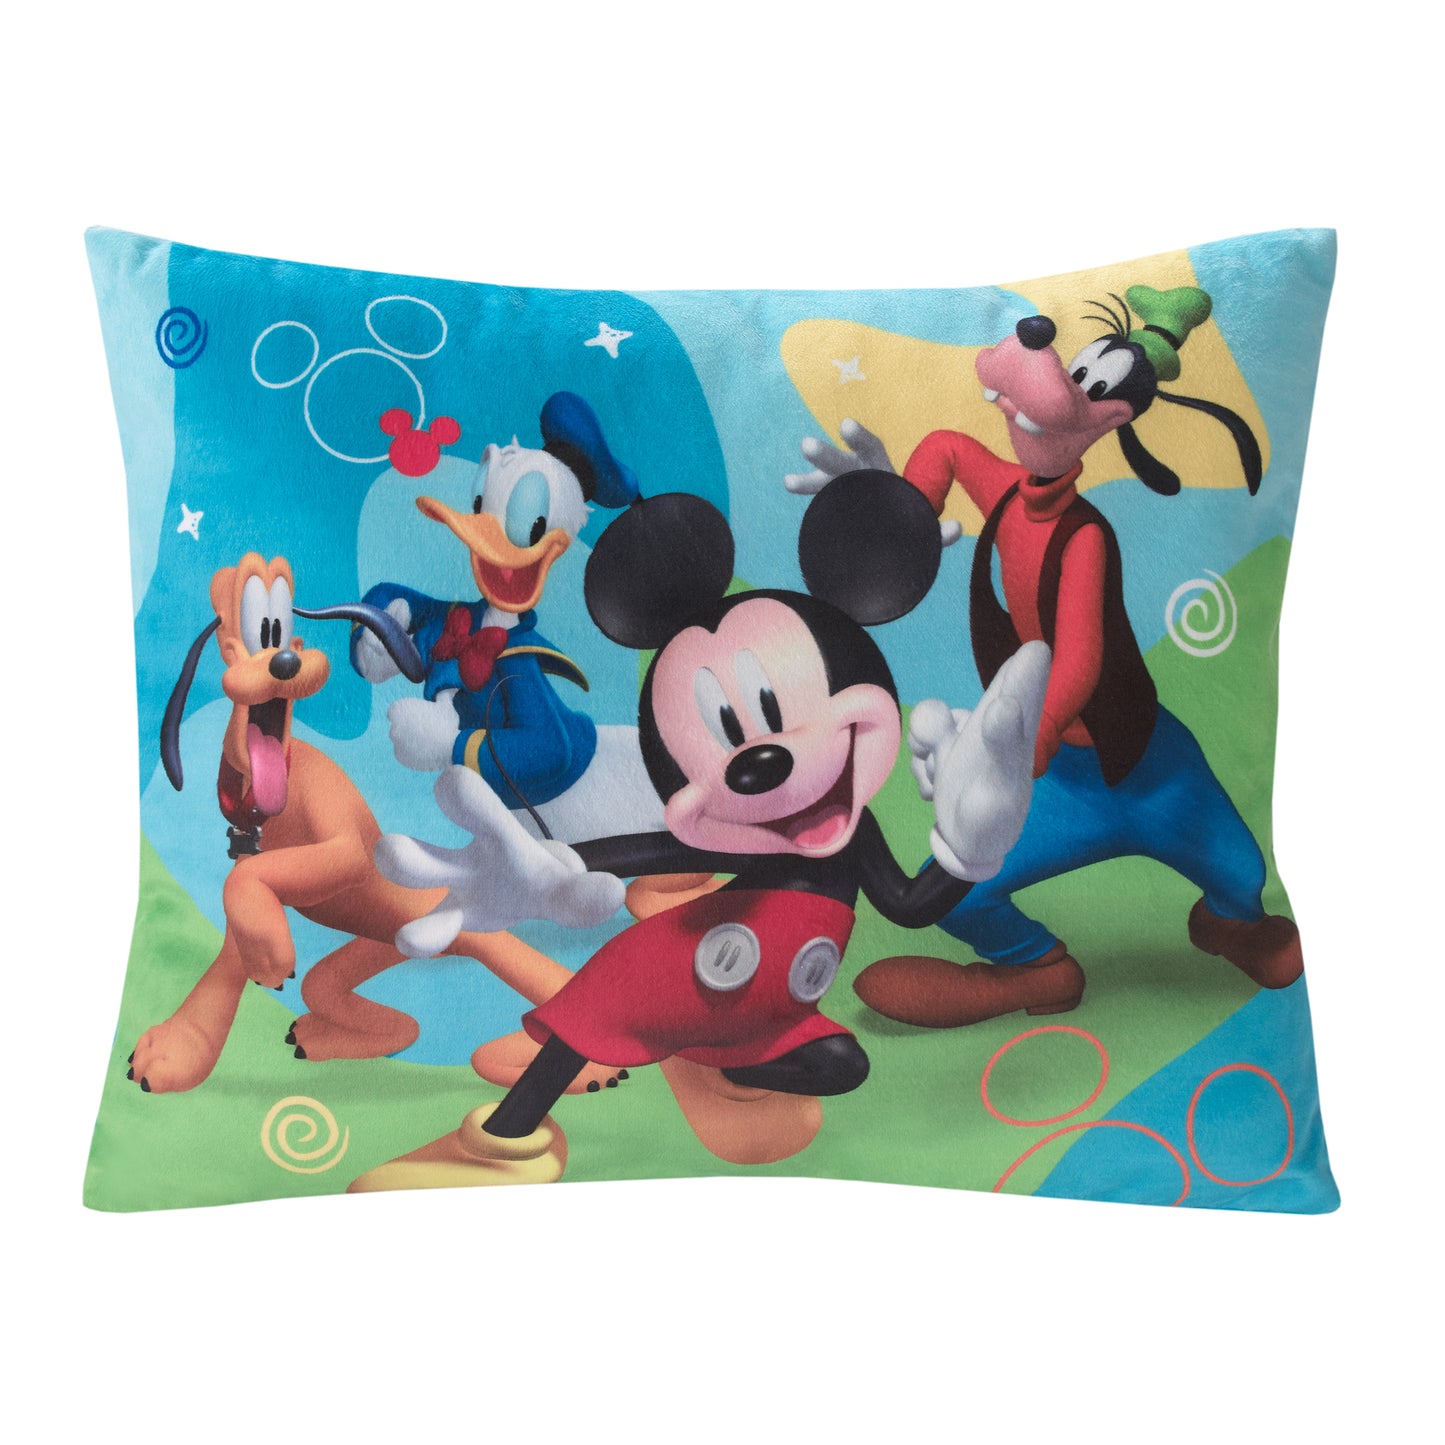 Disney Mickey Mouse Blue, Red, and Green, Donald Duck, Pluto, and Goofy Fun Starts Here Decorative Toddler Pillow